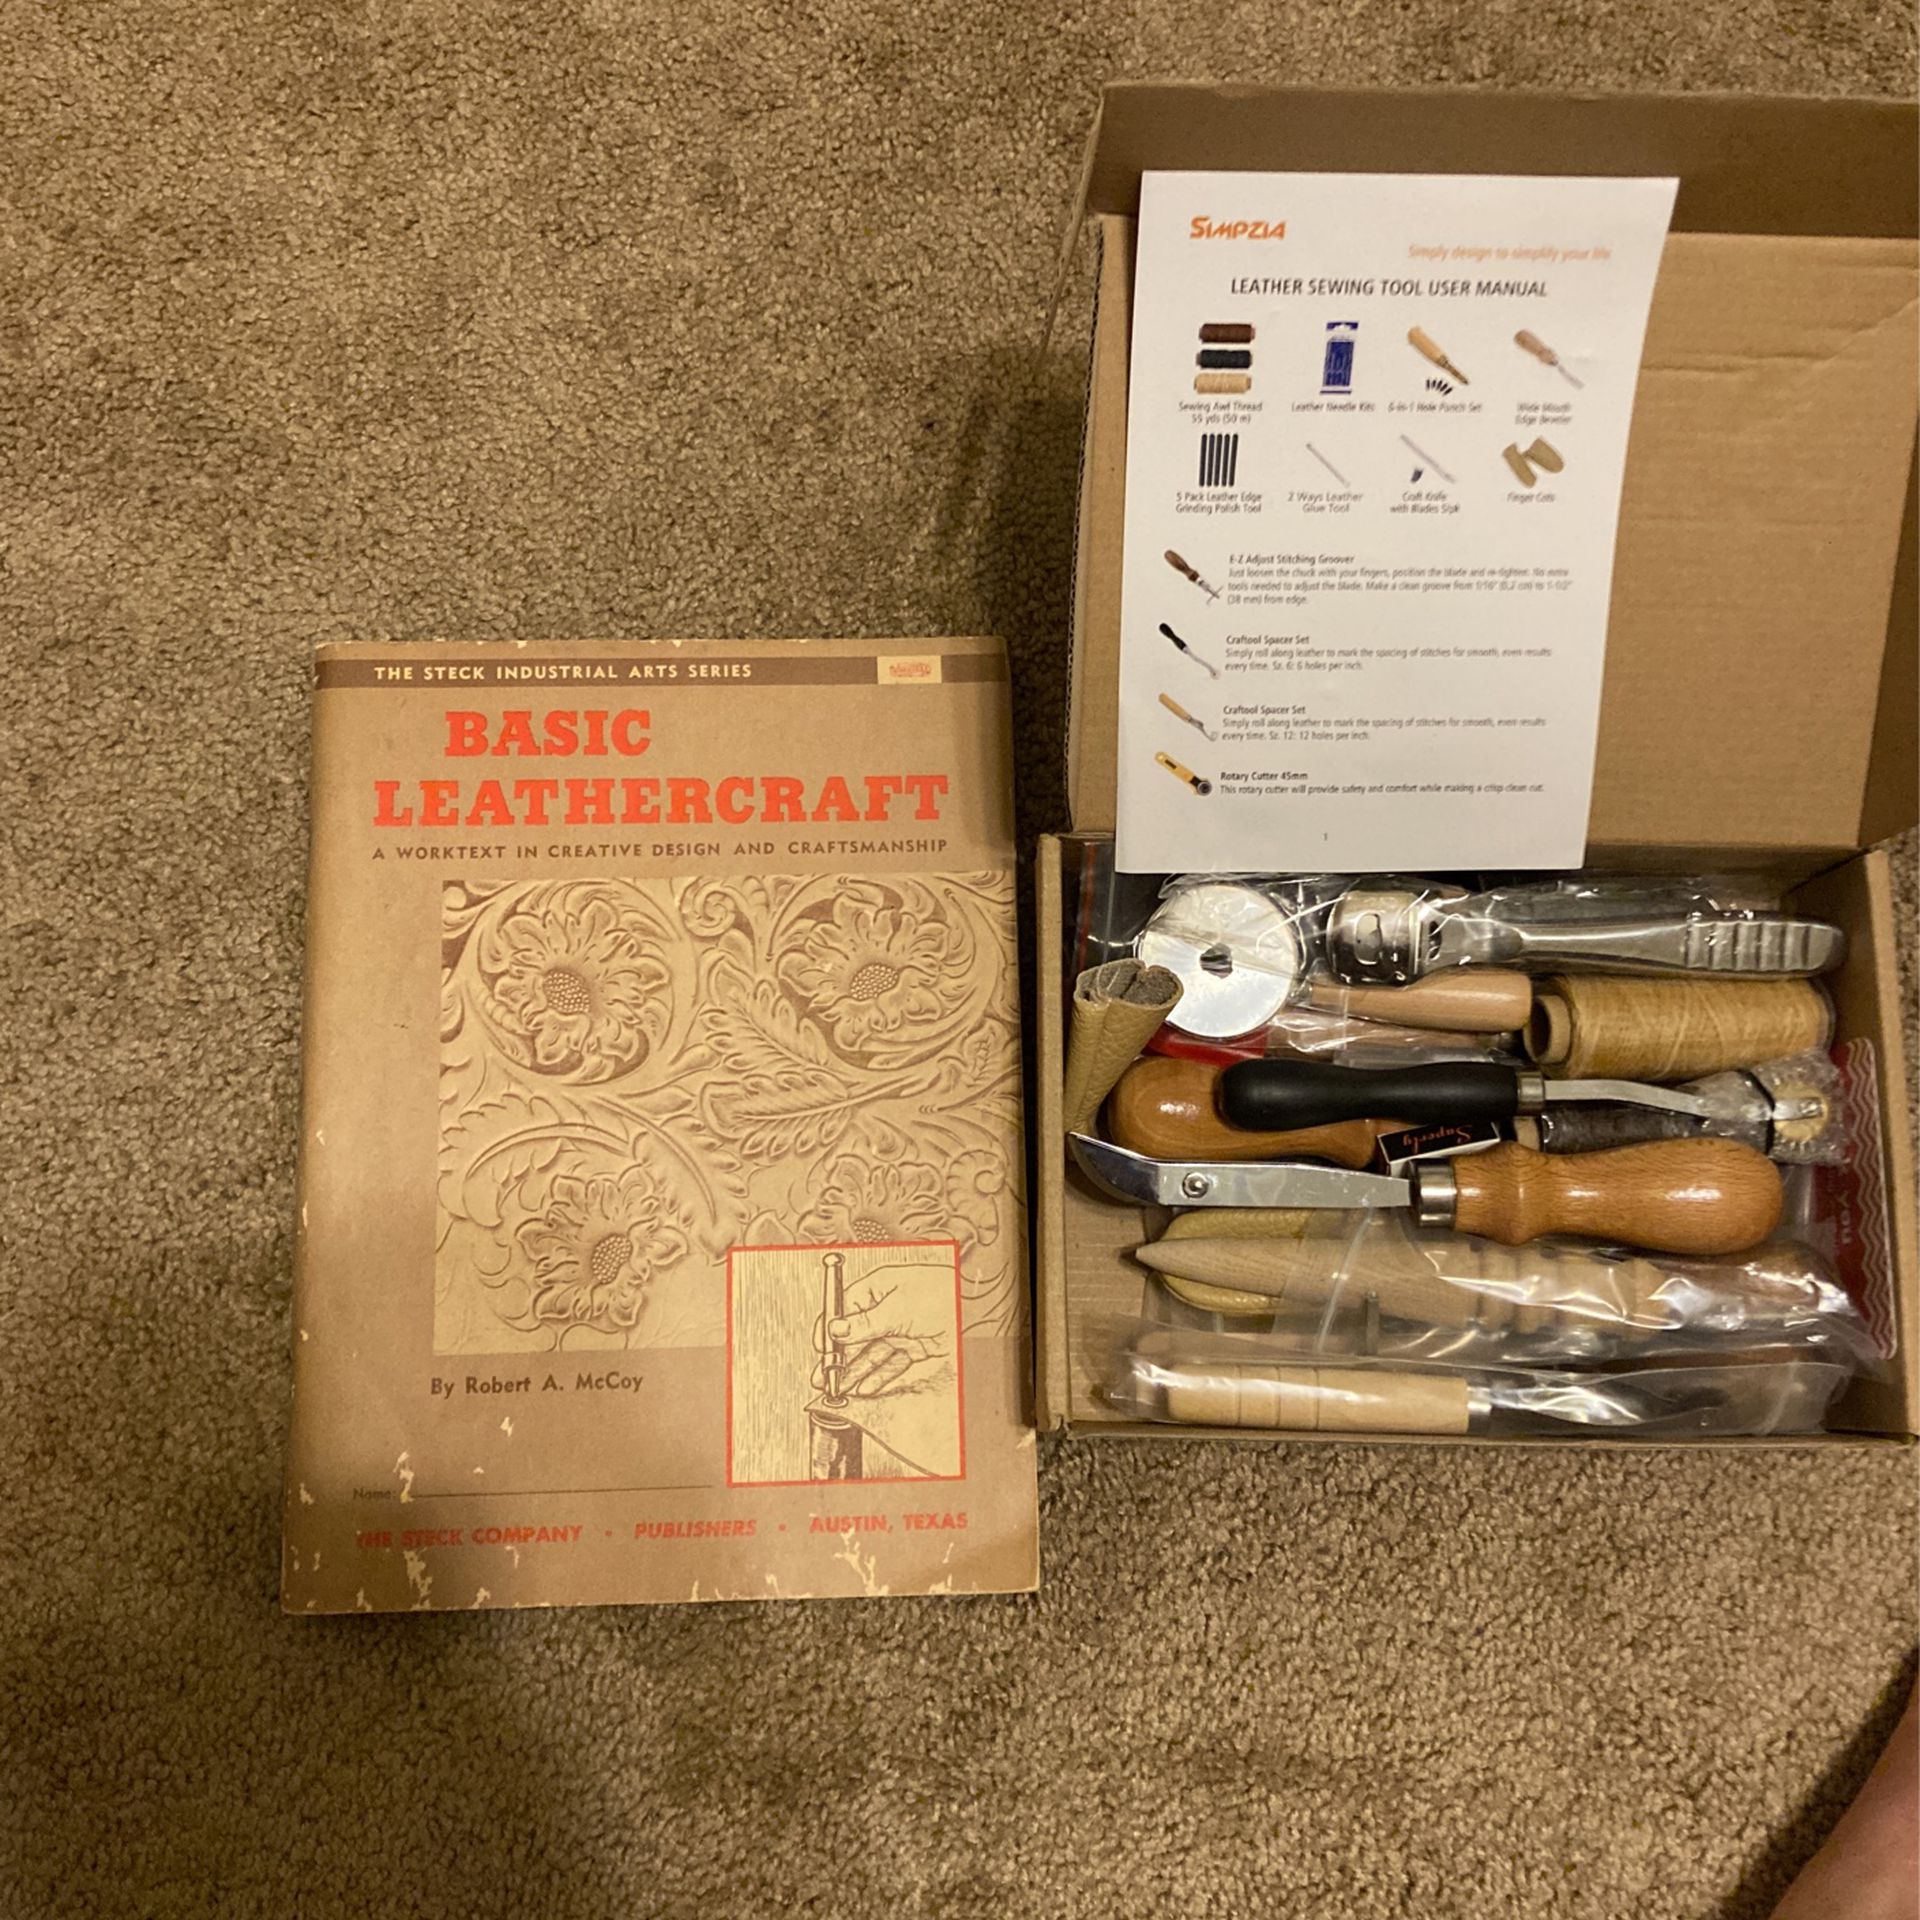 Leather Craft Tools and Book